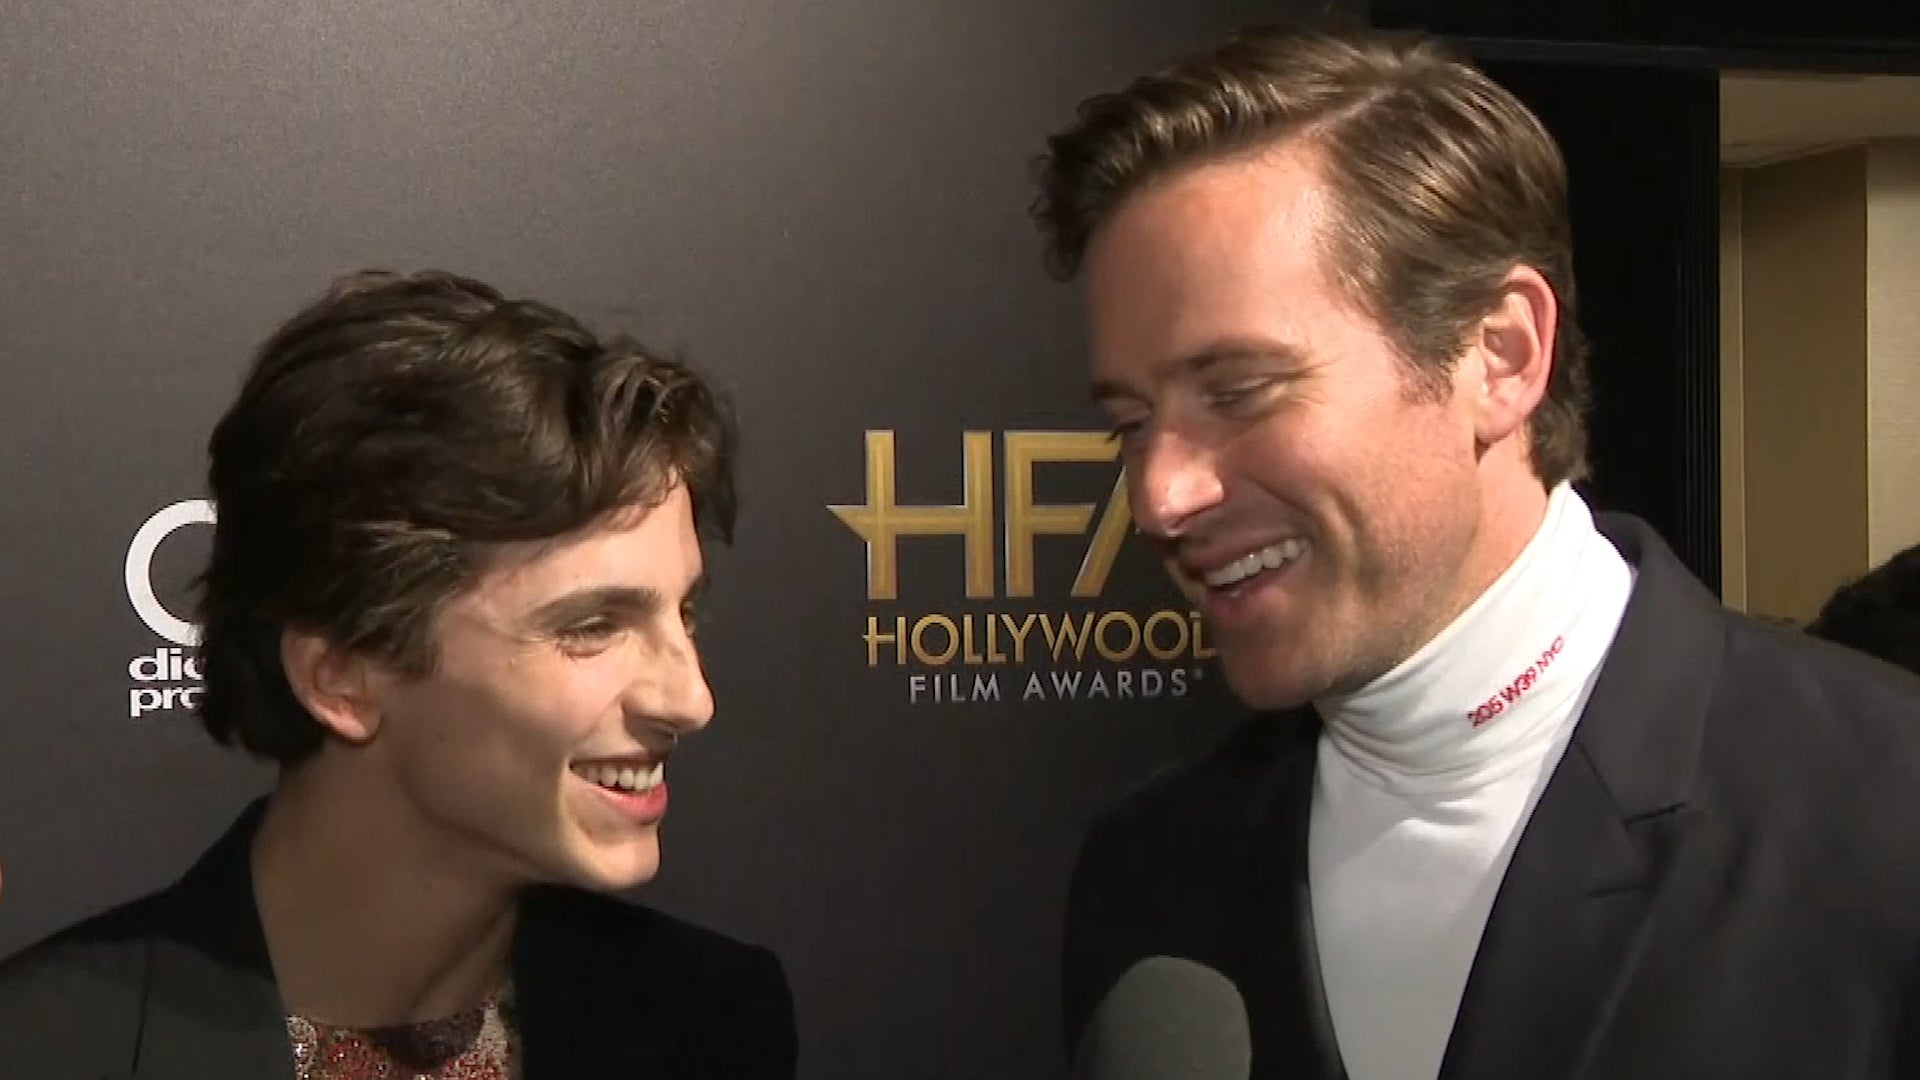 Timothée Chalamet and Armie Hammer Will Star in the 'Call Me by